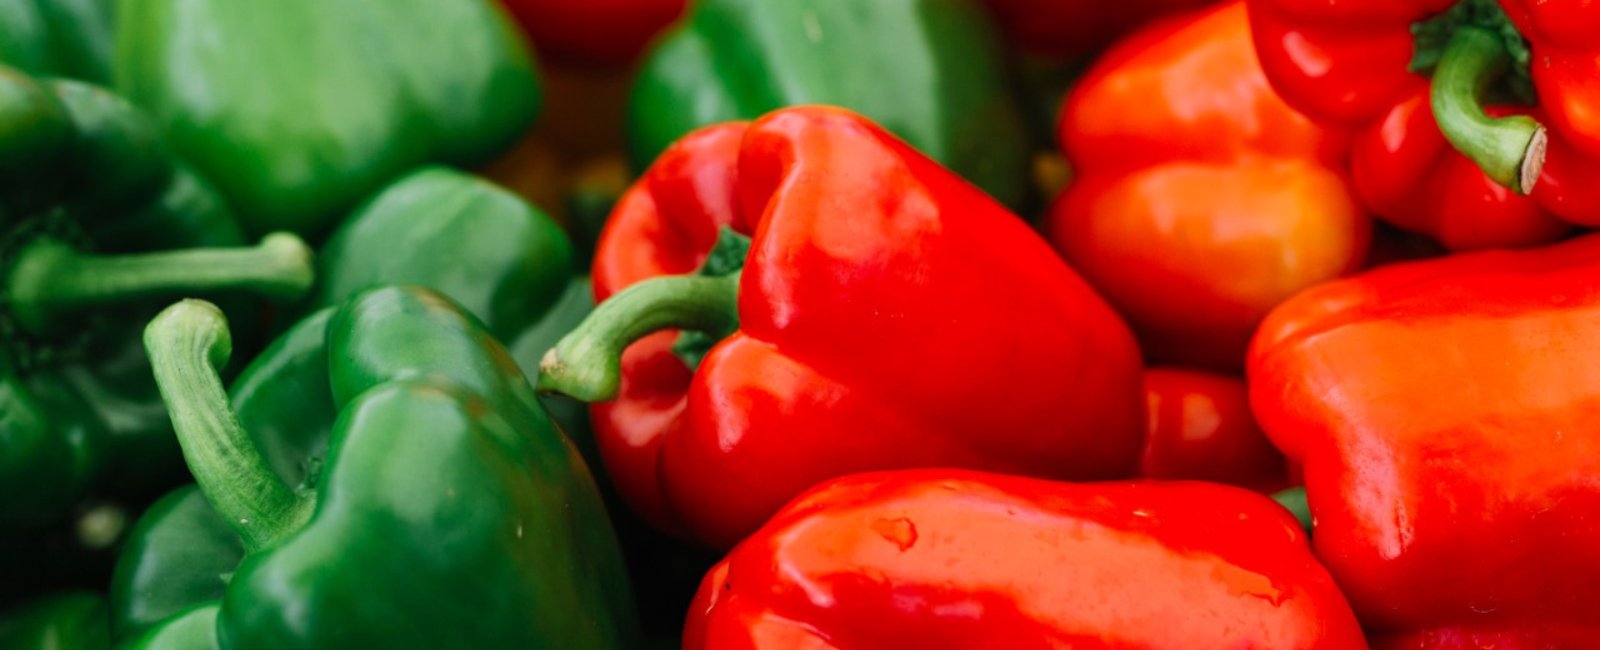 THINGS YOU SHOULD KNOW ABOUT BELL PEPPERS